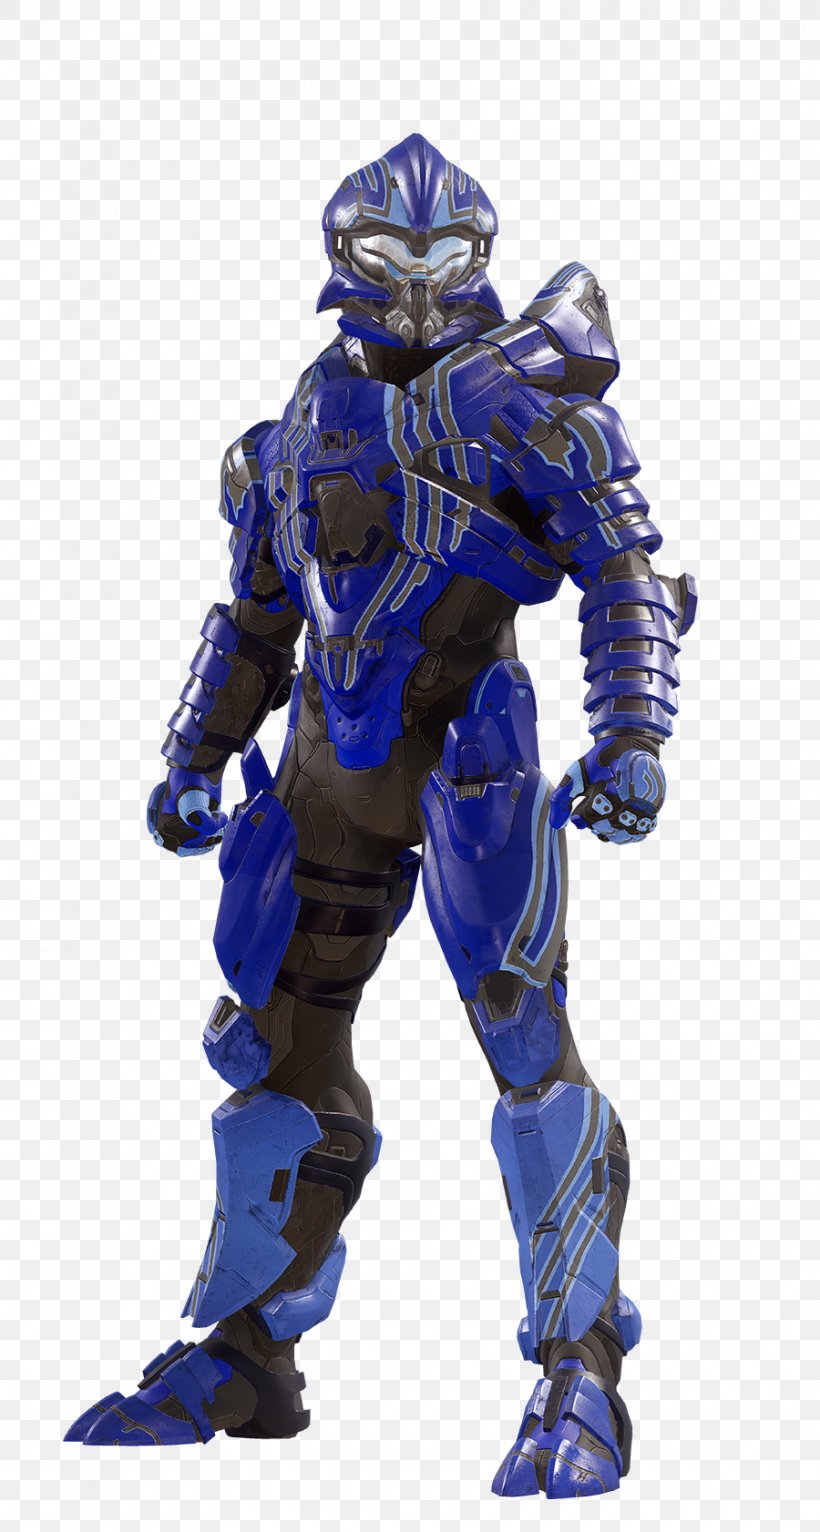 Halo 5: Guardians Halo: Reach Master Chief Halo 4 Halo: Spartan Assault, PNG, 900x1682px, 343 Industries, Halo 5 Guardians, Action Figure, Arbiter, Armour Download Free